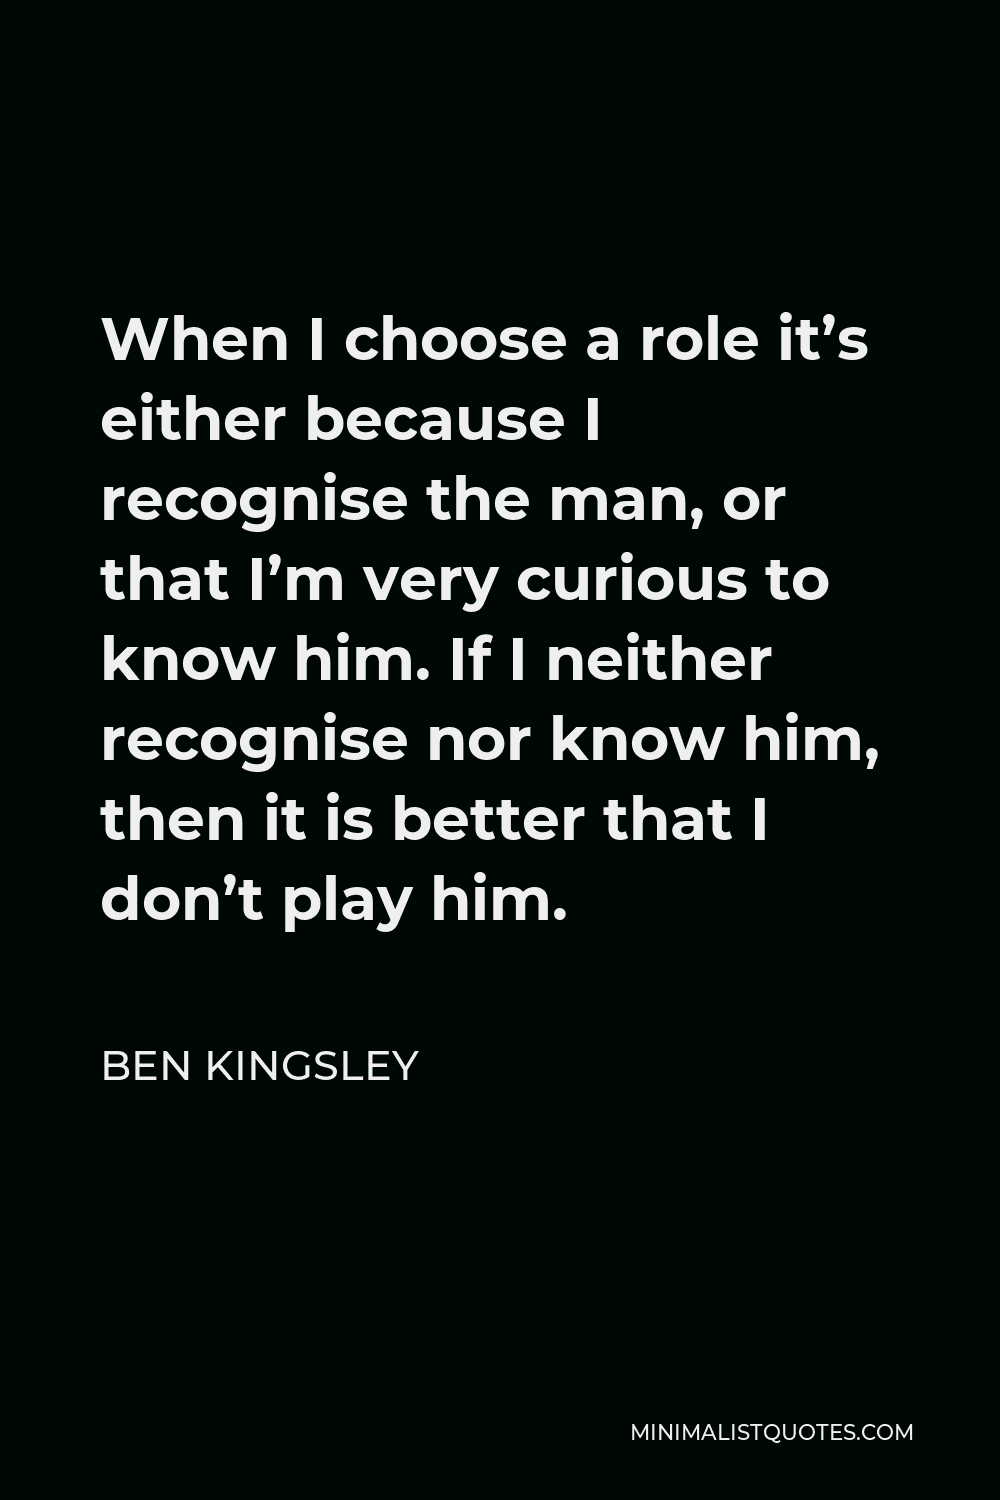 Ben Kingsley Quote - When I choose a role it’s either because I recognise the man, or that I’m very curious to know him. If I neither recognise nor know him, then it is better that I don’t play him.